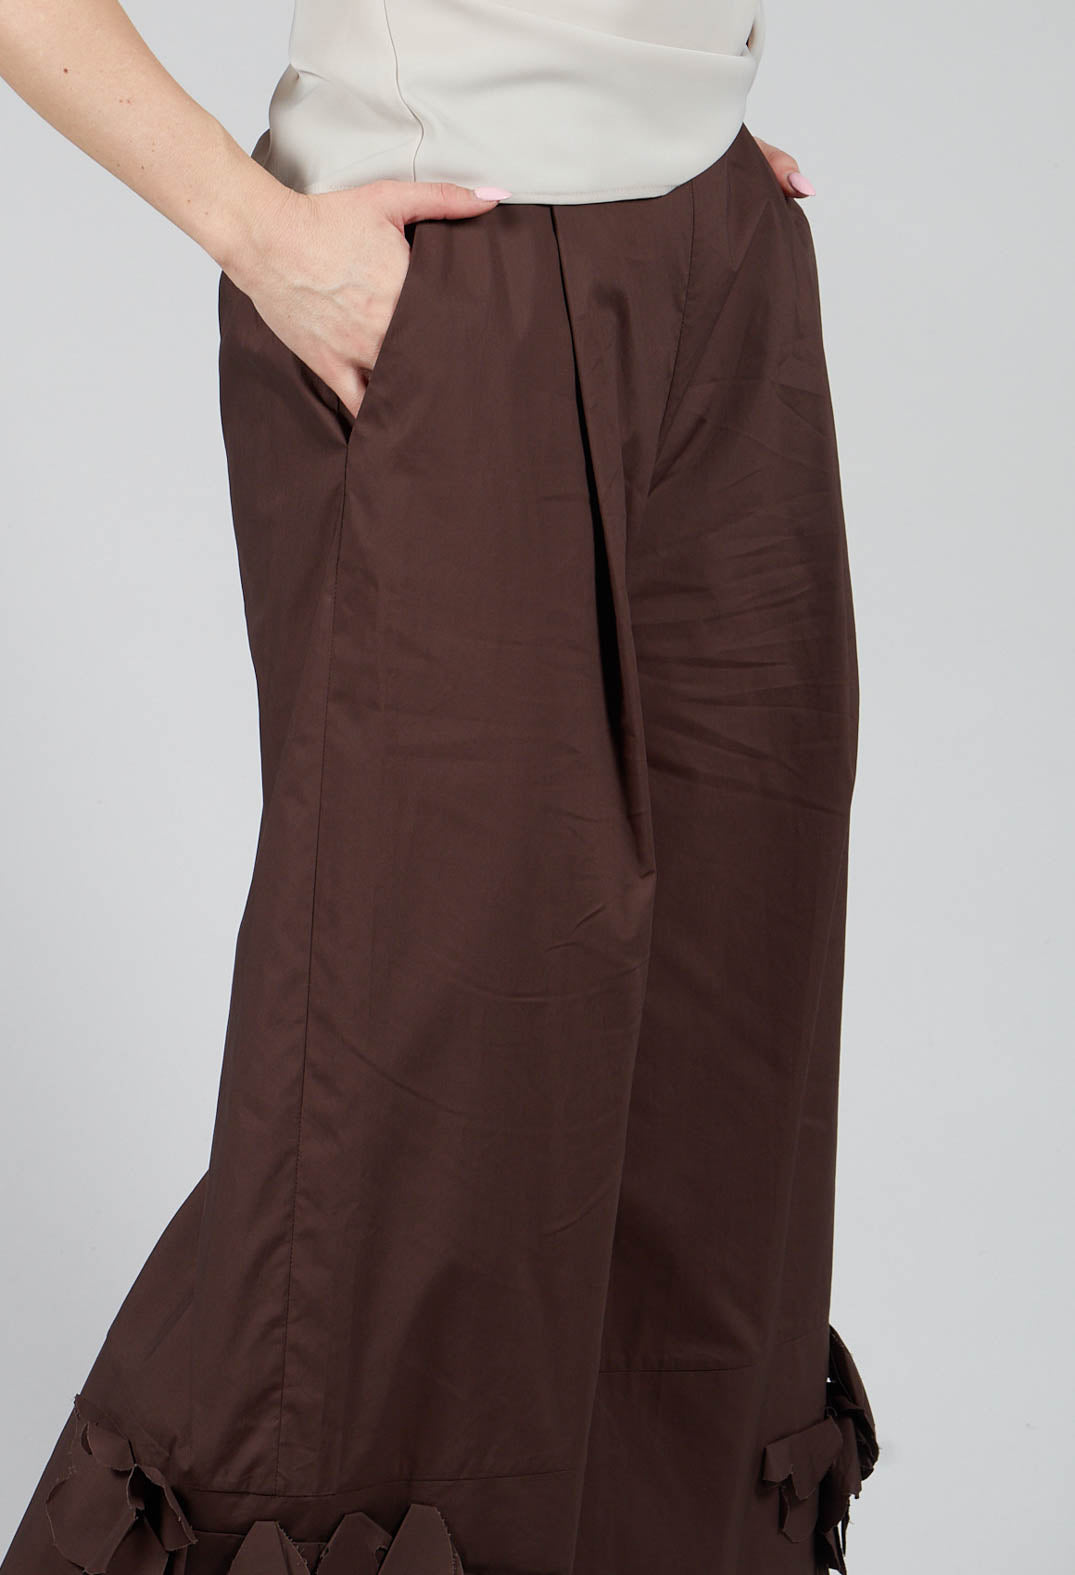 Frill Hemmed Trousers in Chocolate